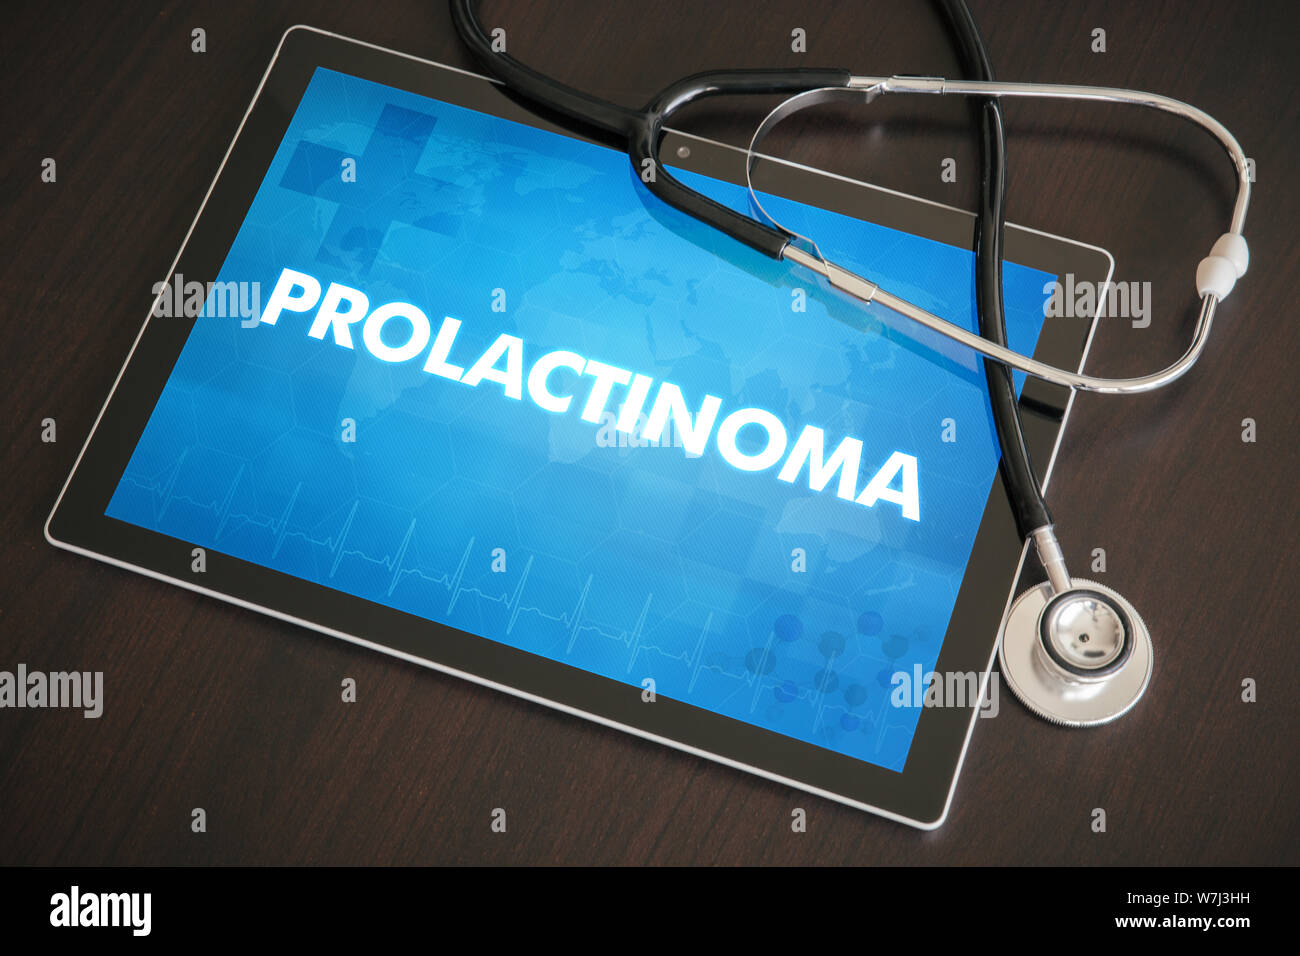 Prolactinoma (endocrine disease) diagnosis medical concept on tablet screen with stethoscope. Stock Photo